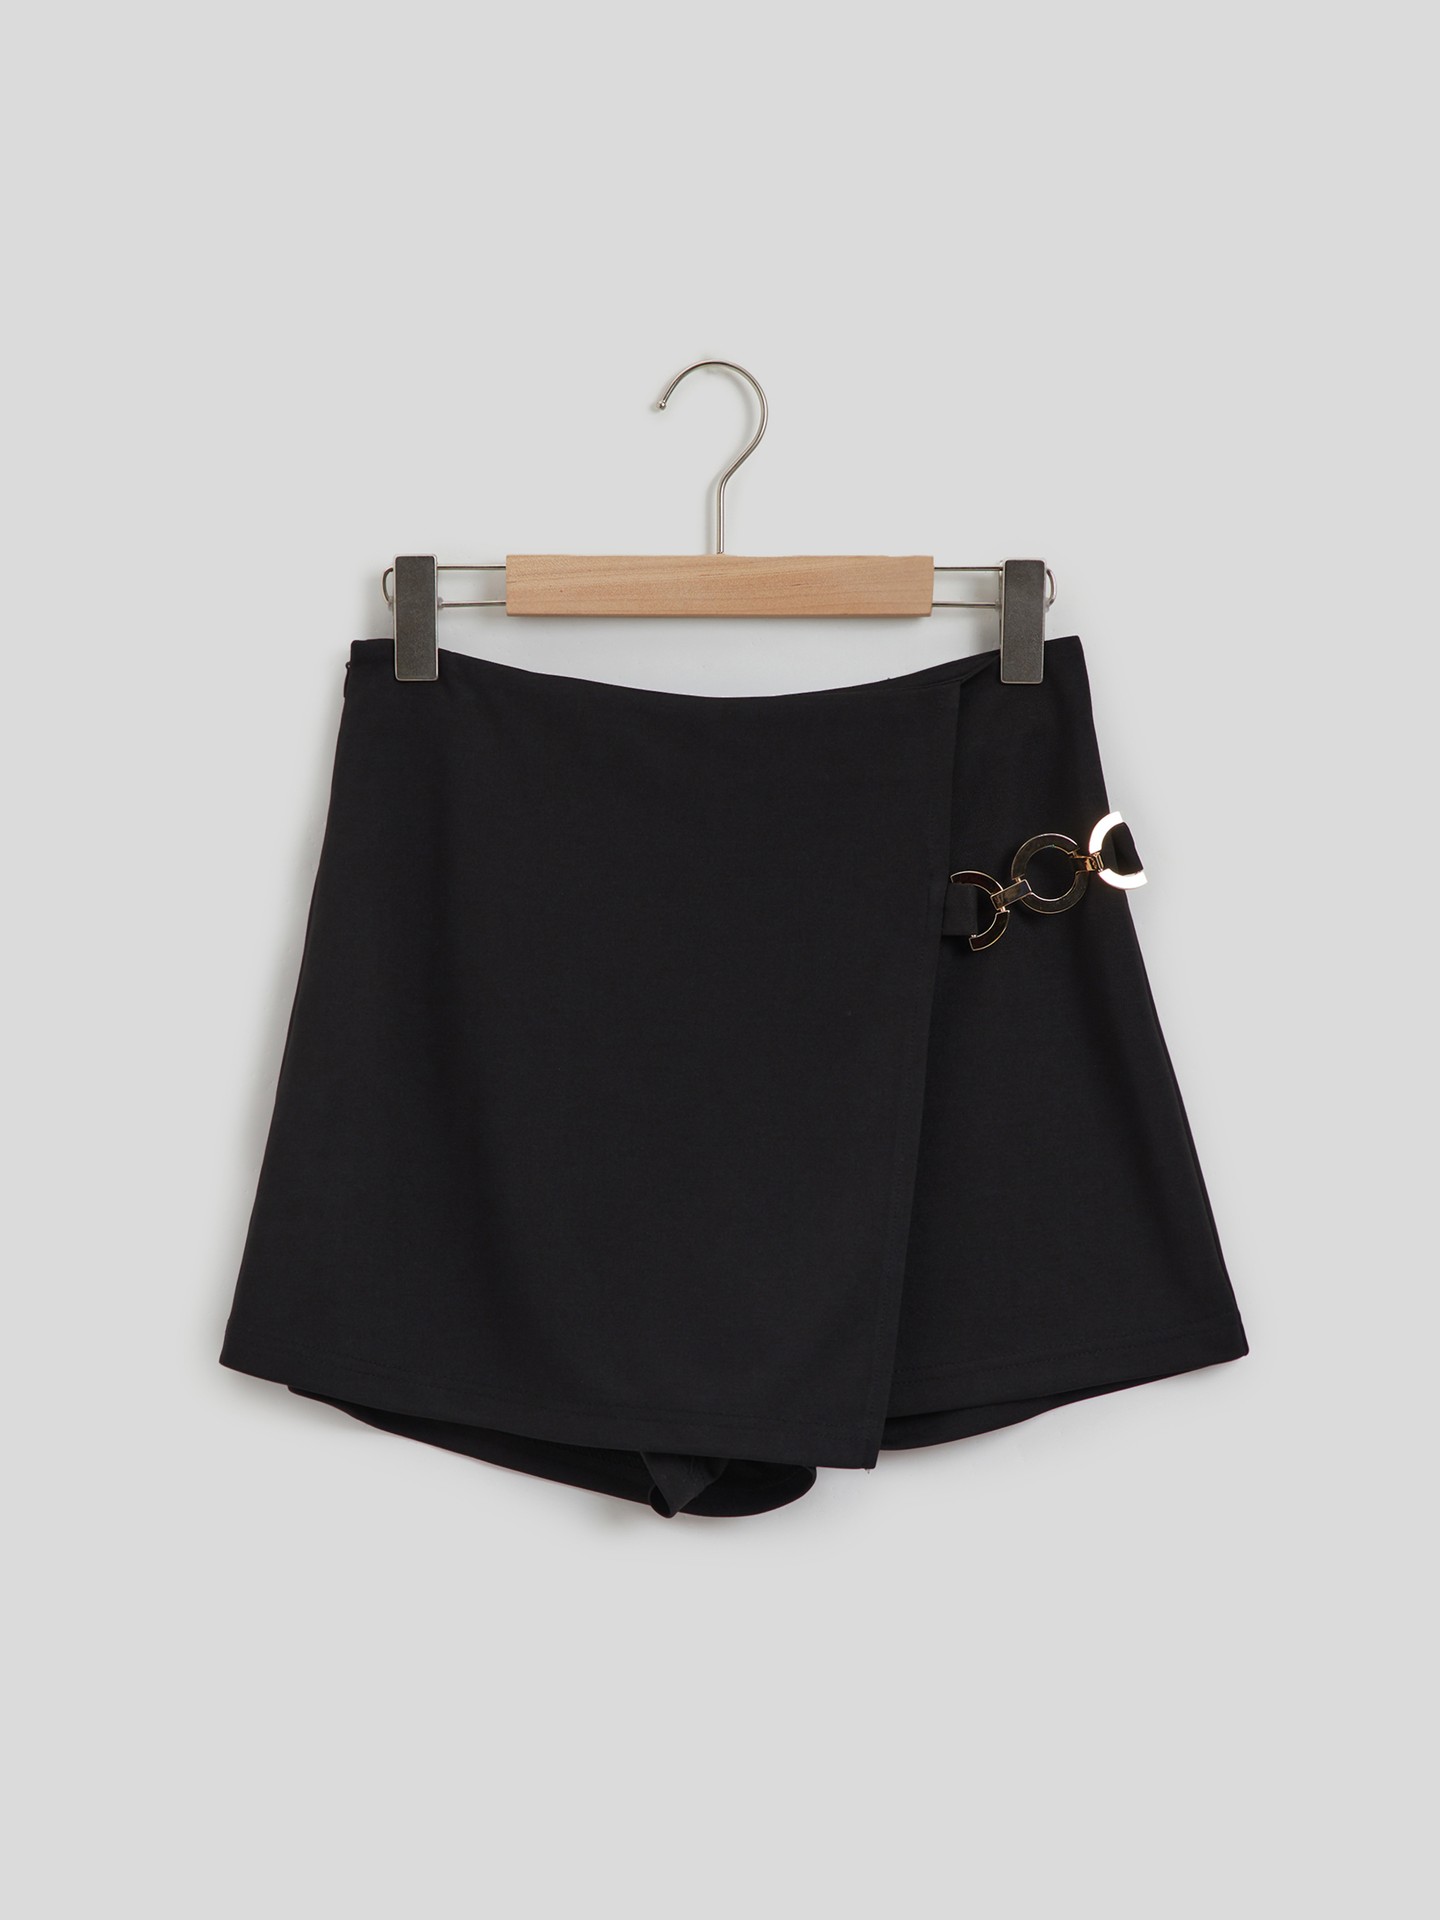 Polyester Black FF 08 02 Shorts Skirt Pant at Rs 199/piece in Noida